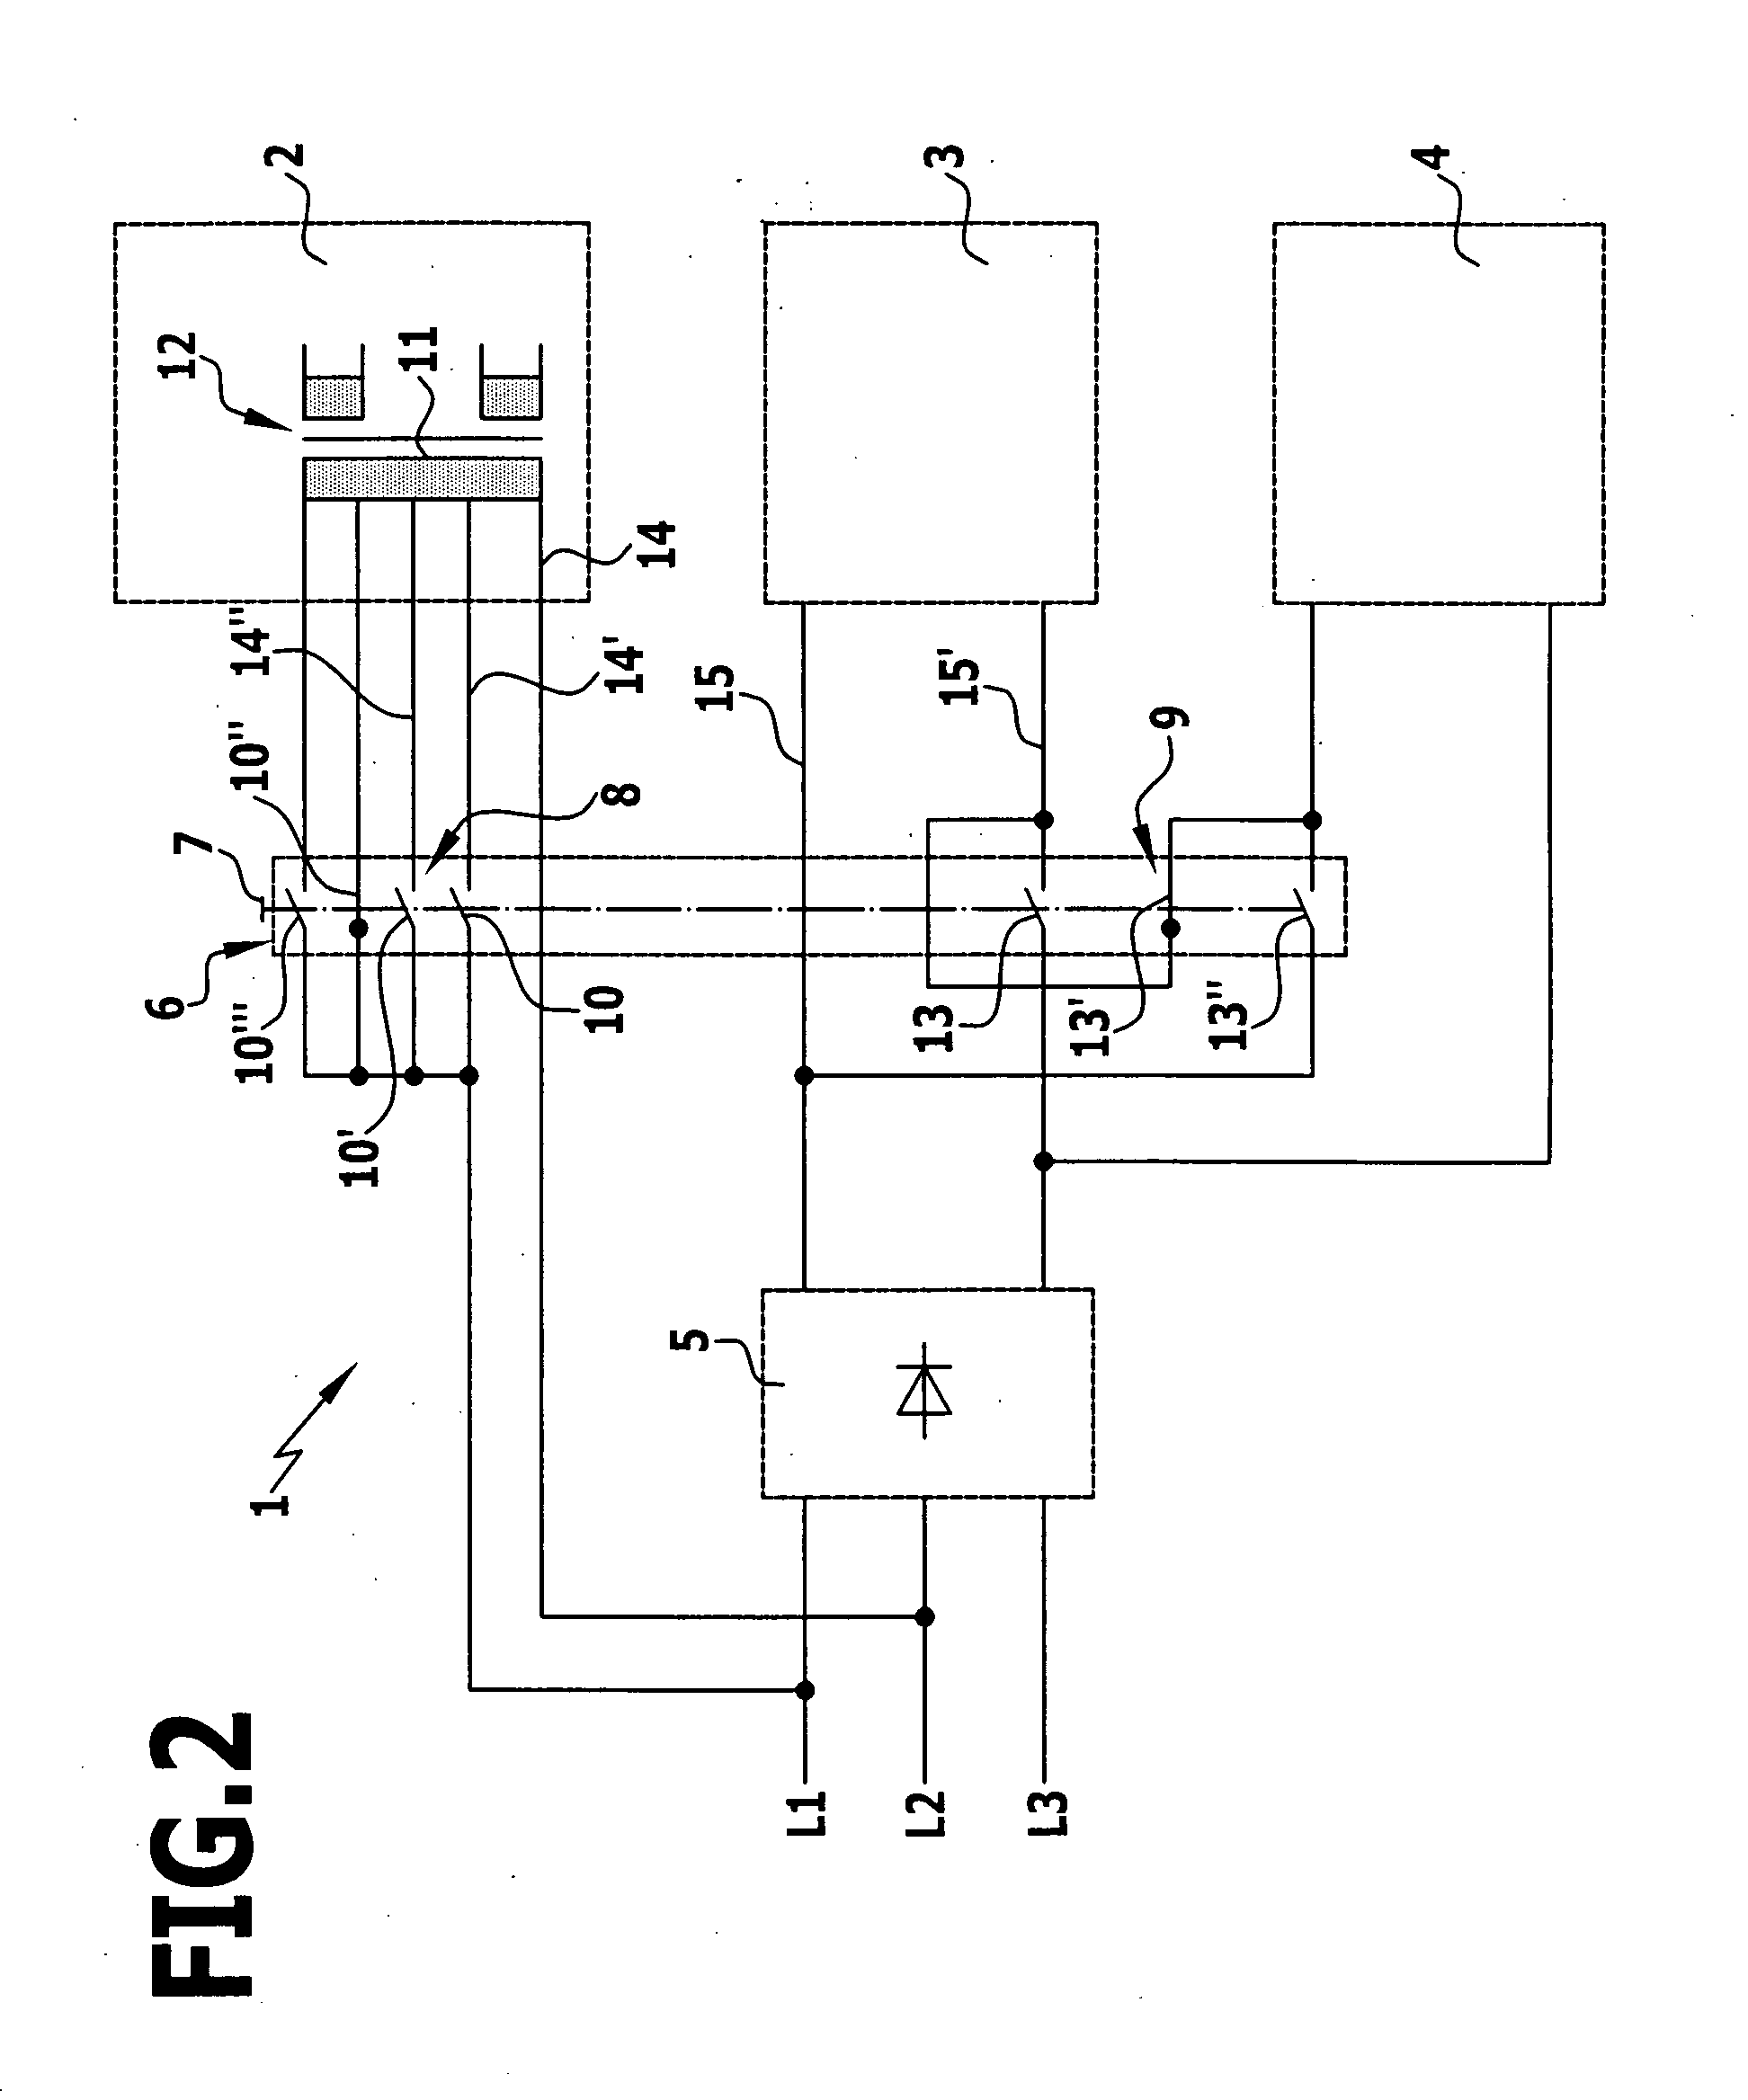 Welding current source for a welding apparatus